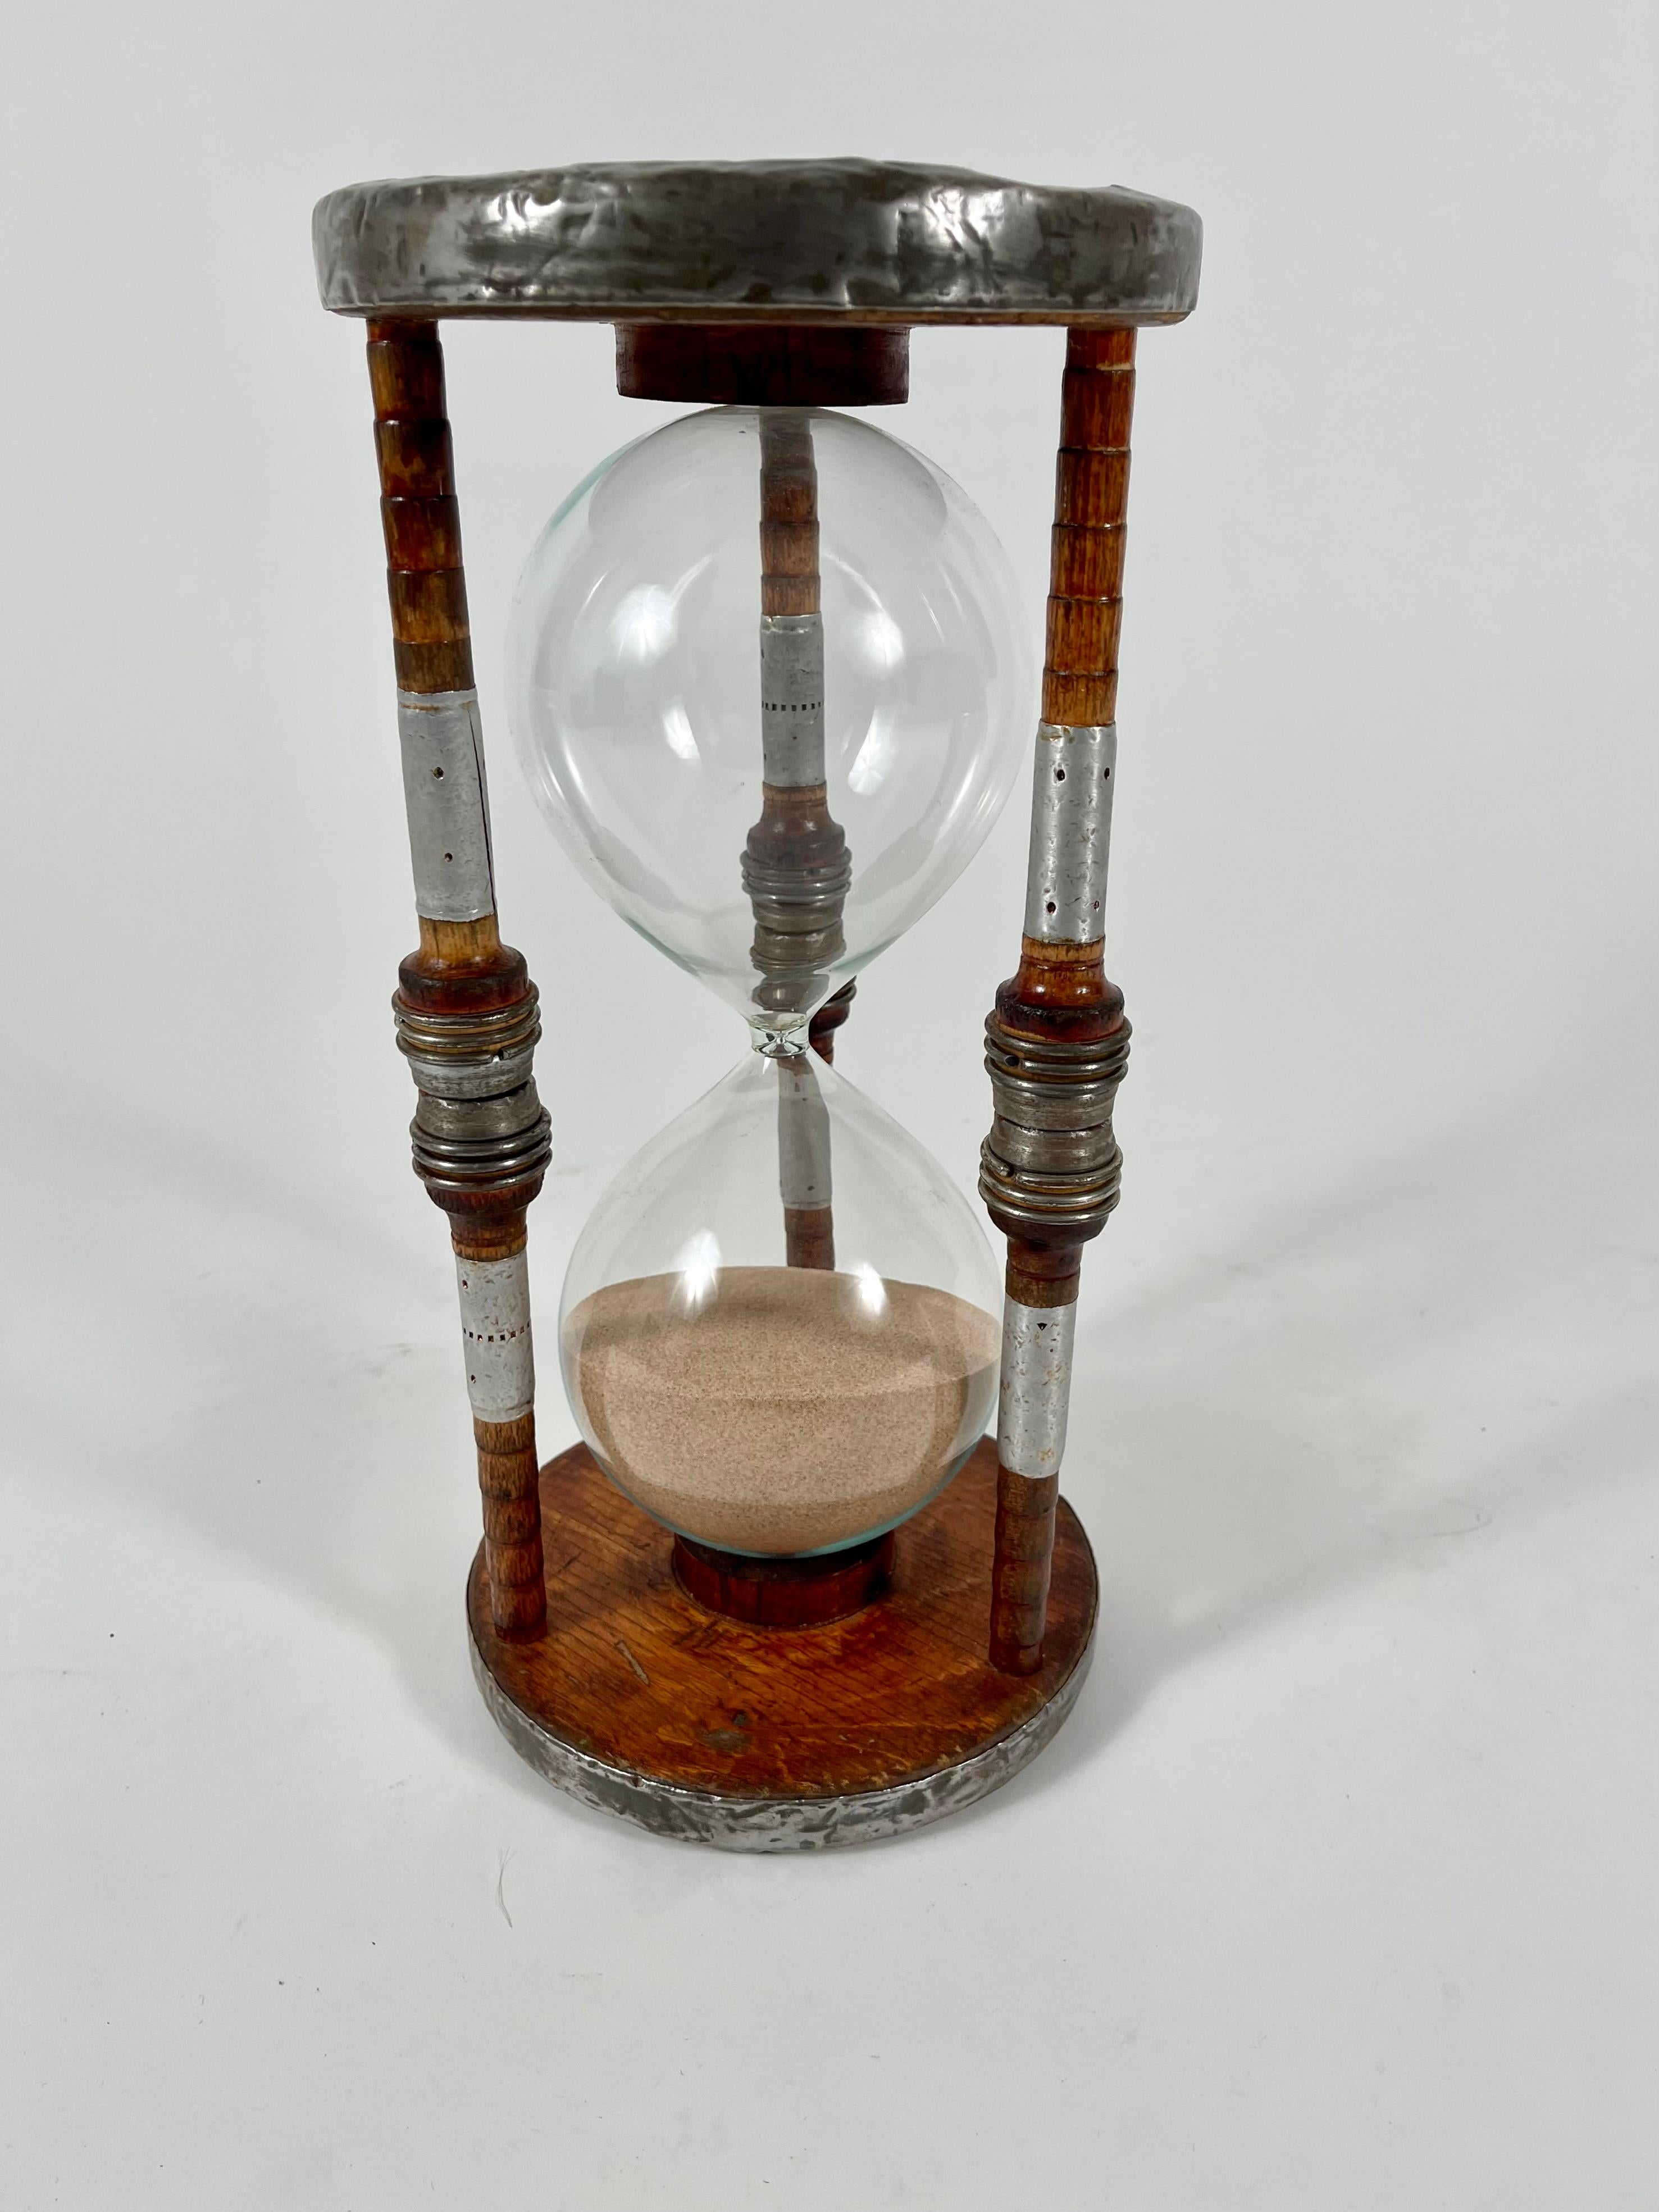 An antique English bobbin one hour hourglass sand timer. Crafted from original antique bobbins and spools which were used to wind thread in Victorian cotton mills, the bases bear the impressed original marks of 